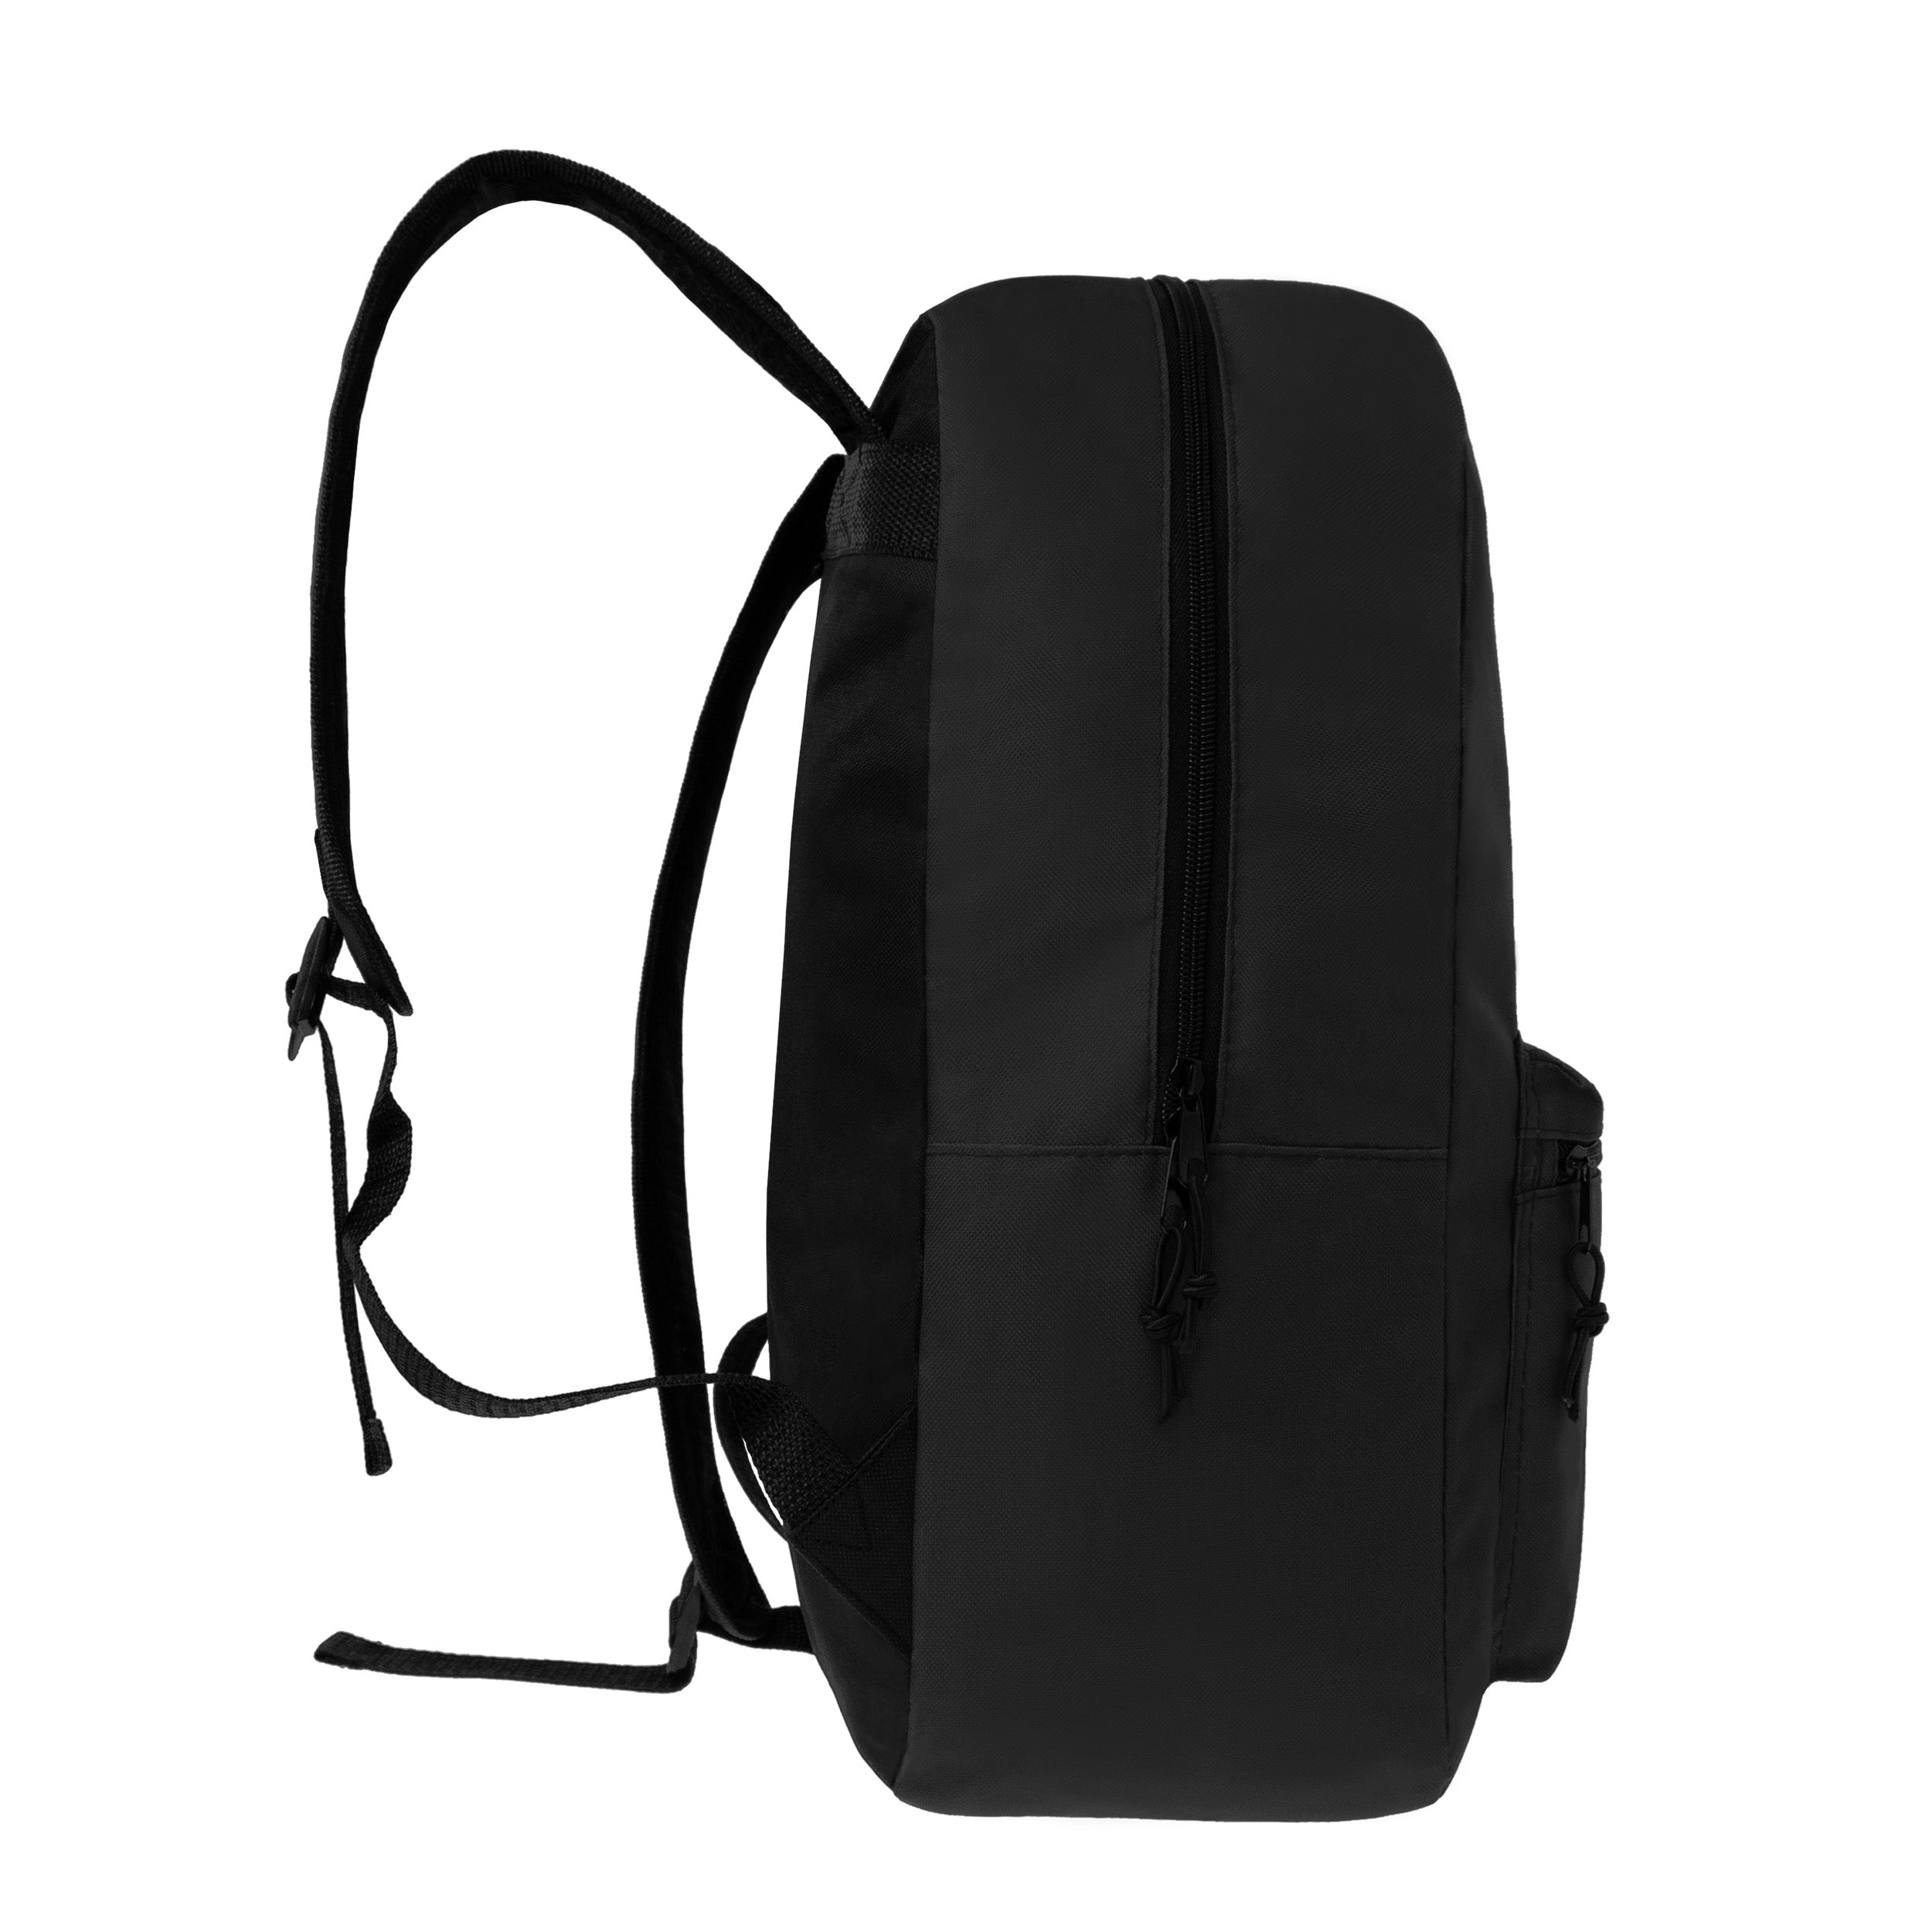 19 inch black wholesale backpack in bulk with free shipping